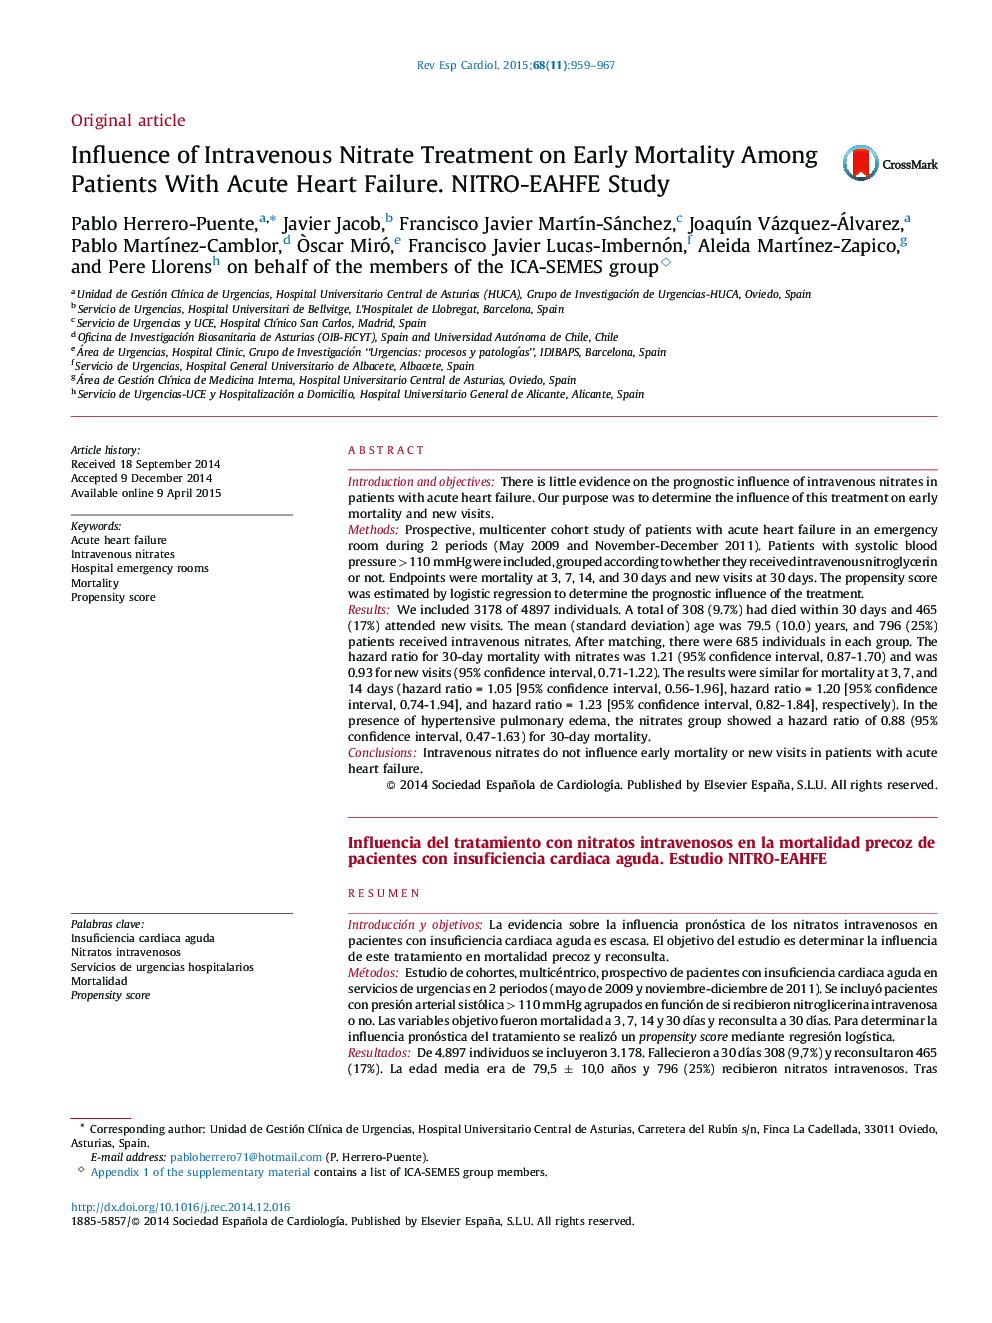 Influence of Intravenous Nitrate Treatment on Early Mortality Among Patients With Acute Heart Failure. NITRO-EAHFE Study